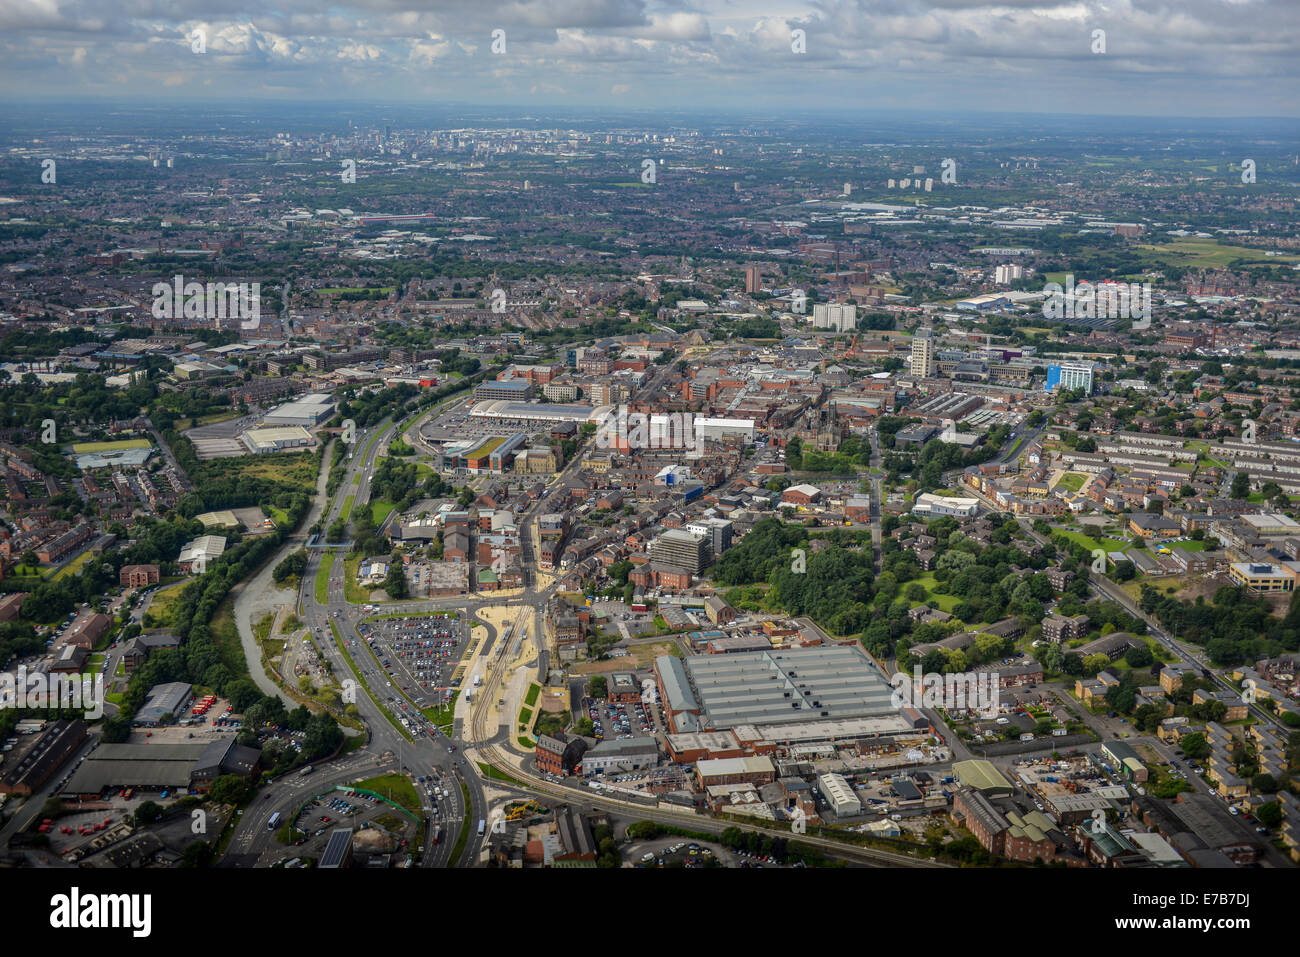 An aerial view across the centre of Oldham, Greater Manchester. Central Manchester is visible in the distance. Stock Photo